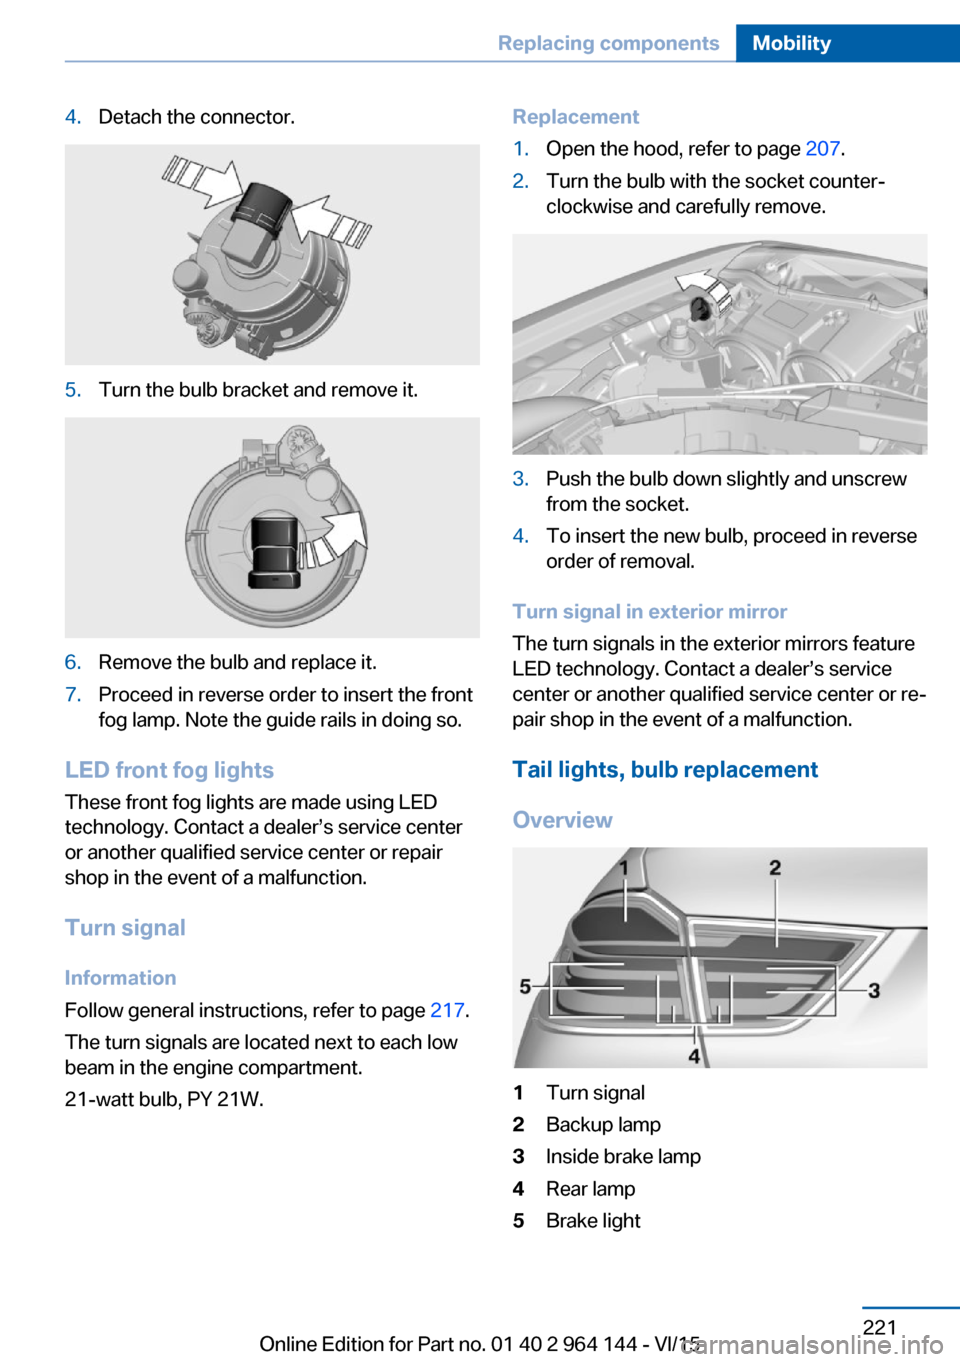 BMW X4 2016 F26 Owners Manual 4.Detach the connector.5.Turn the bulb bracket and remove it.6.Remove the bulb and replace it.7.Proceed in reverse order to insert the front
fog lamp. Note the guide rails in doing so.
LED front fog l